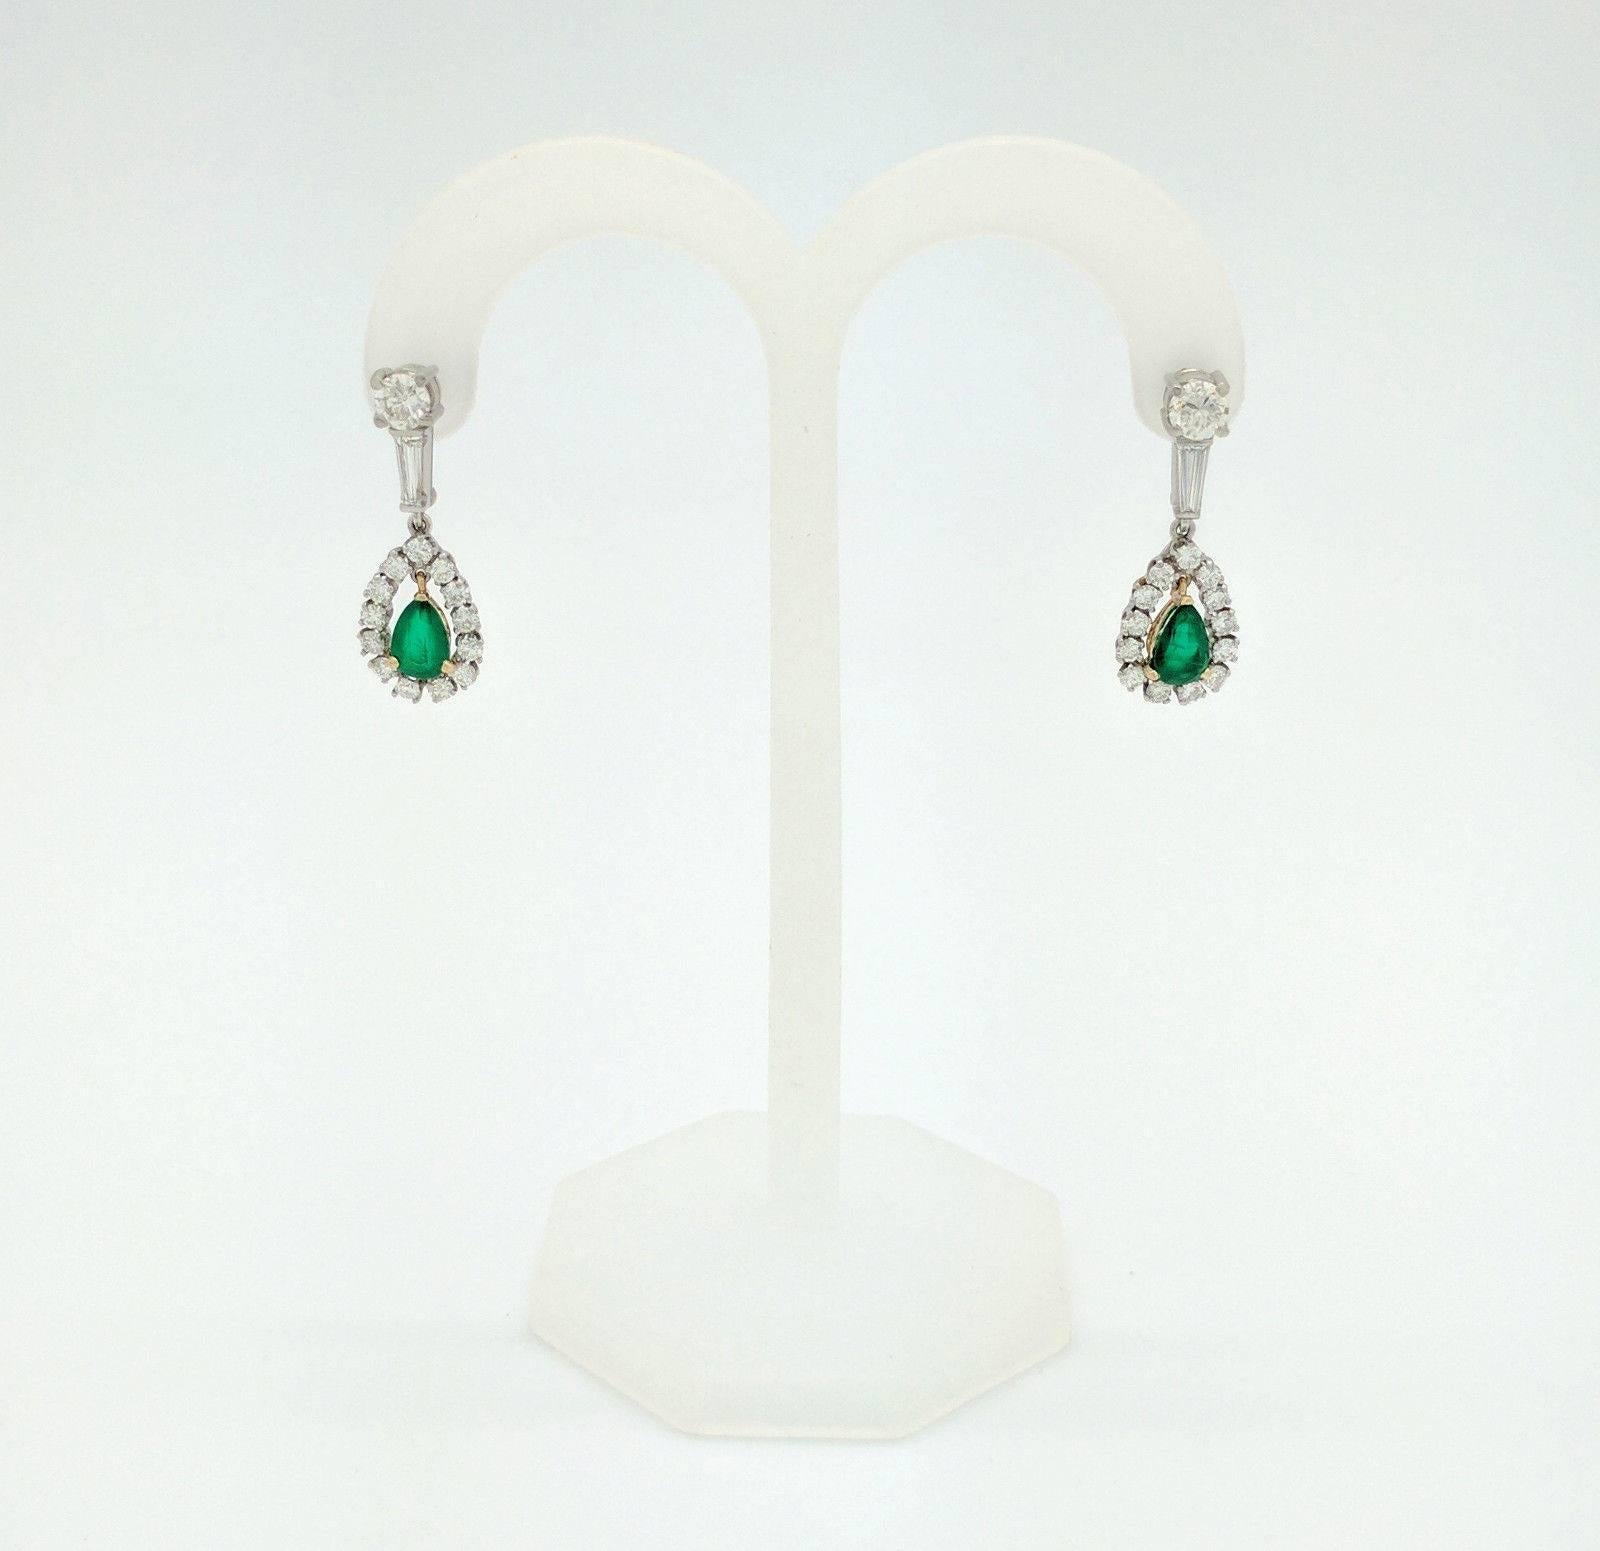 Ladies 14K Two-Tone 3.70ctw Emerald & Diamond Dangle/Drop Earrings SI1,G

You are viewing a pair of gorgeous emerald and diamond dangle/drop earrings.

These earrings are crafted from 14k white and yellow gold, weigh 8 grams, and measure 1 inches in